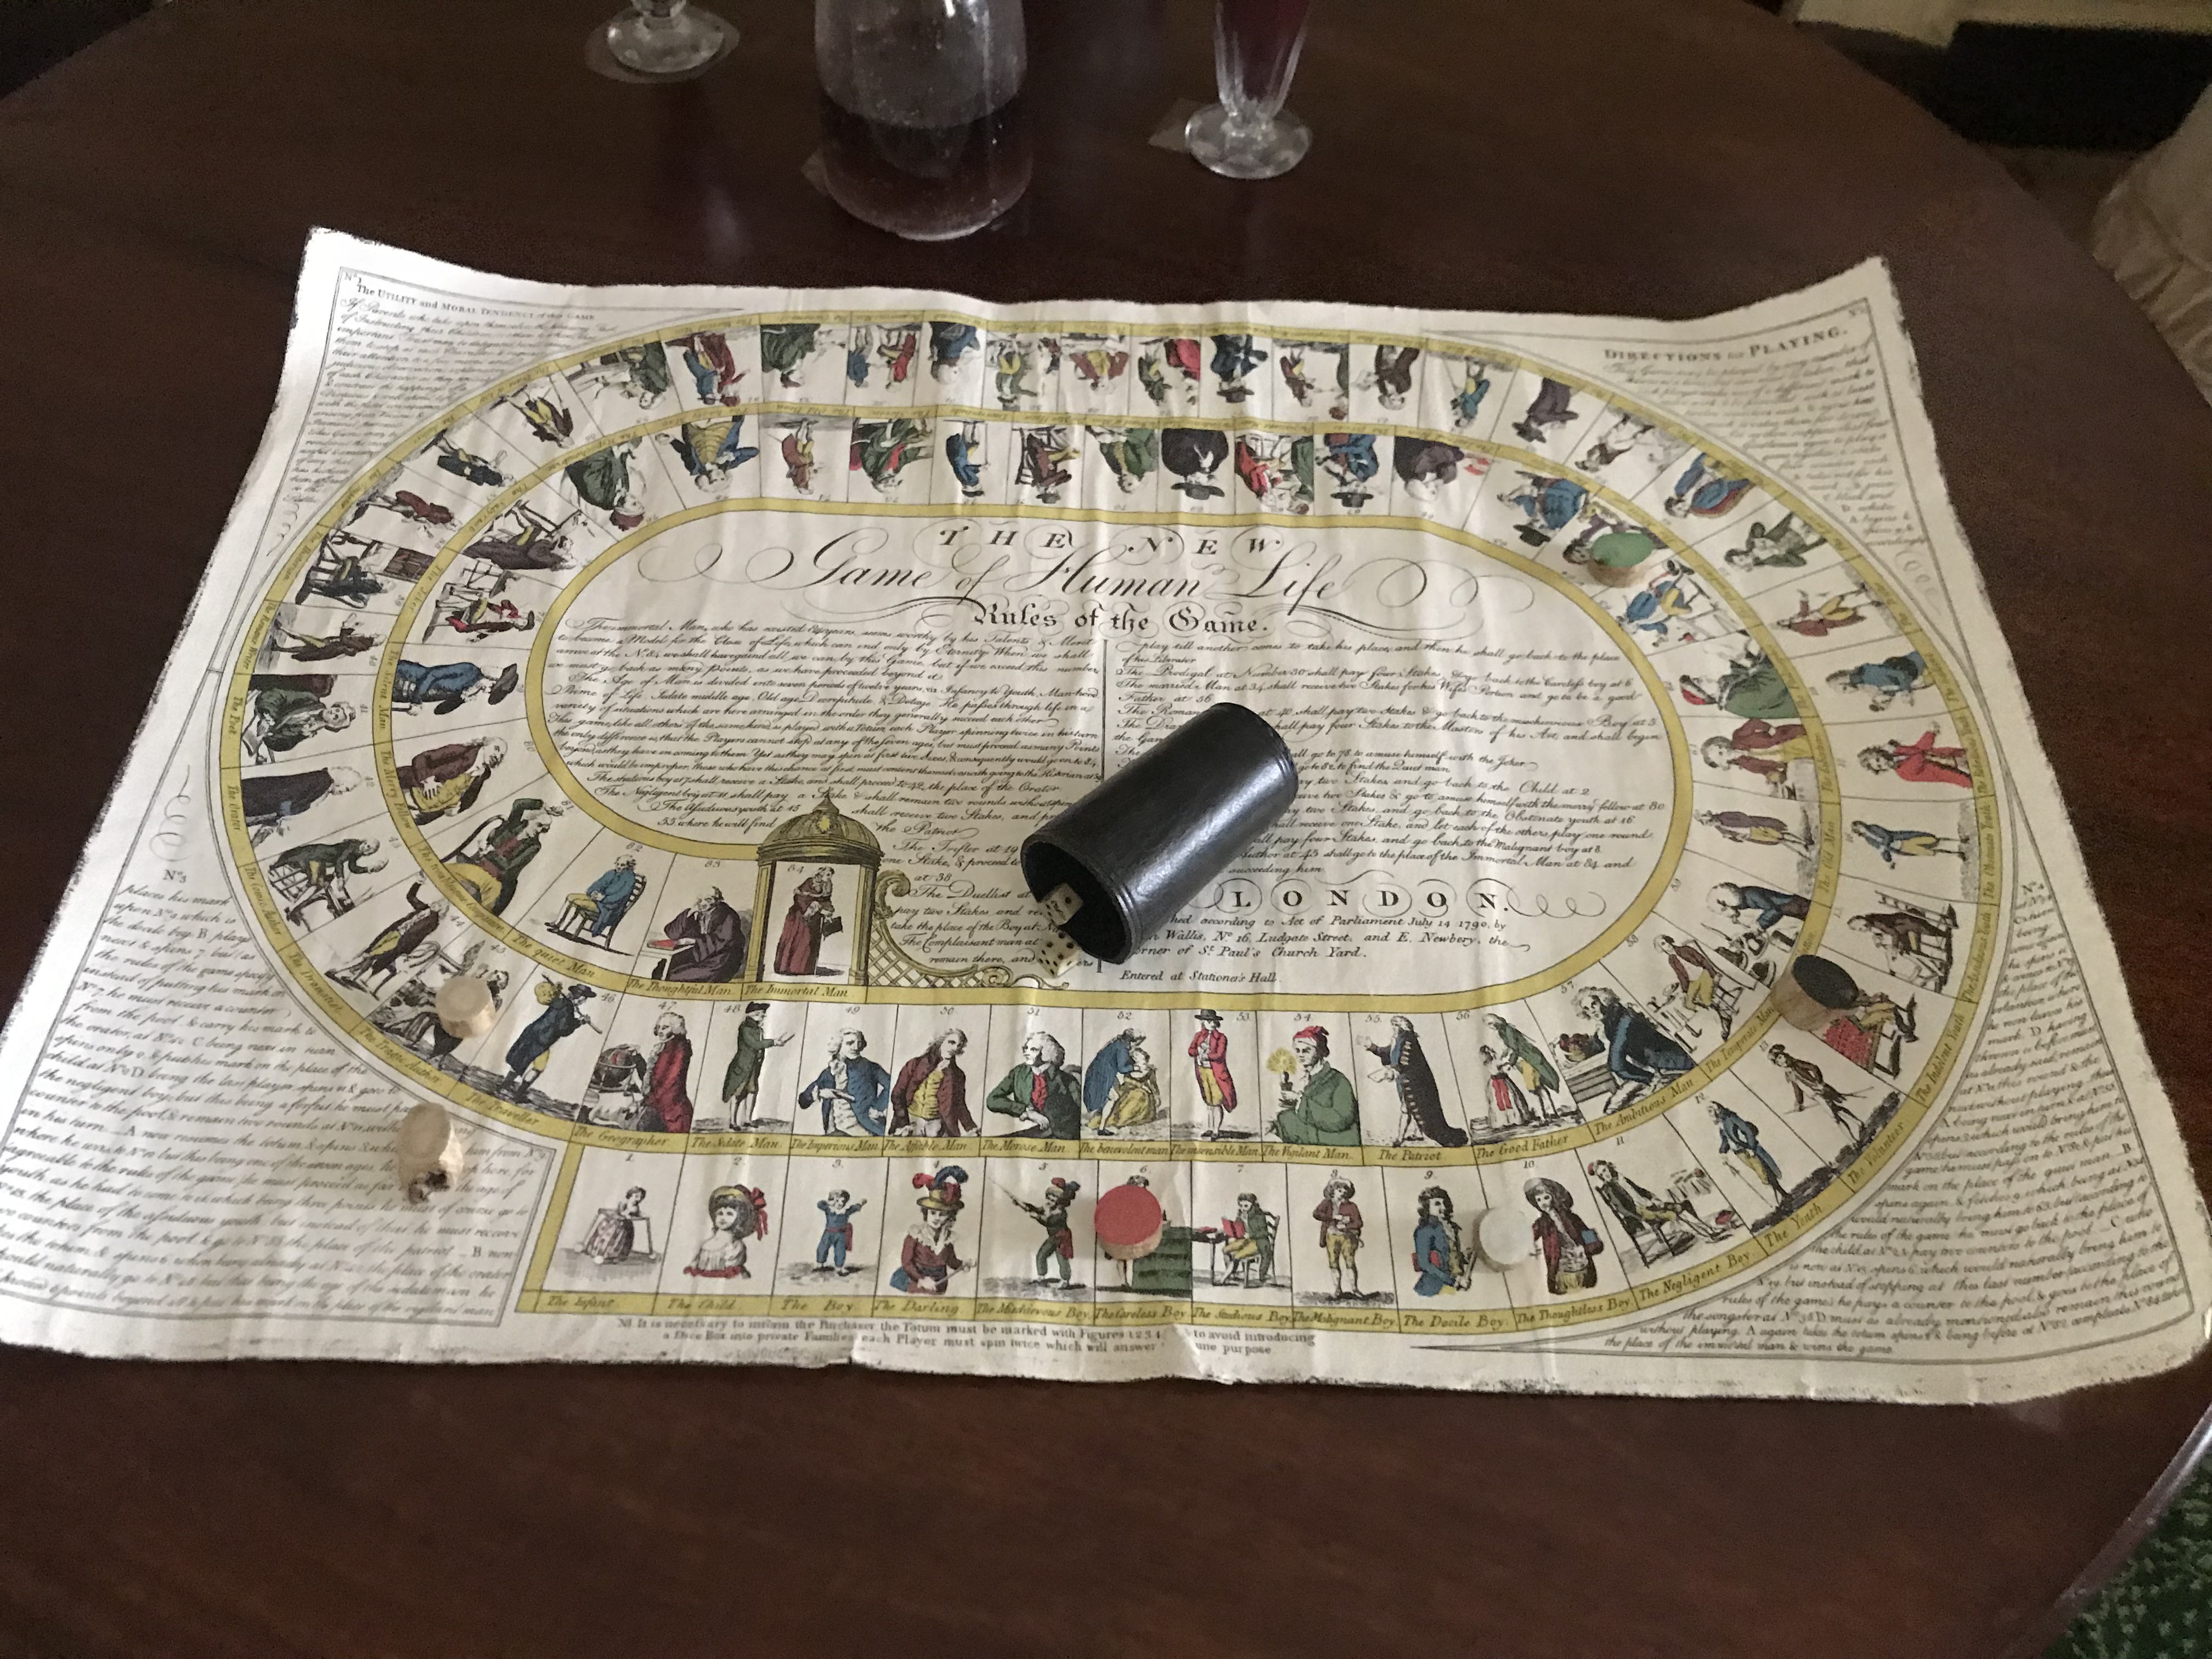 New game of Human Life at Sully Historic Site - board game from 1790 that encouraged young players to develop proper moral character, learning the exigencies of the seven stages of life, from